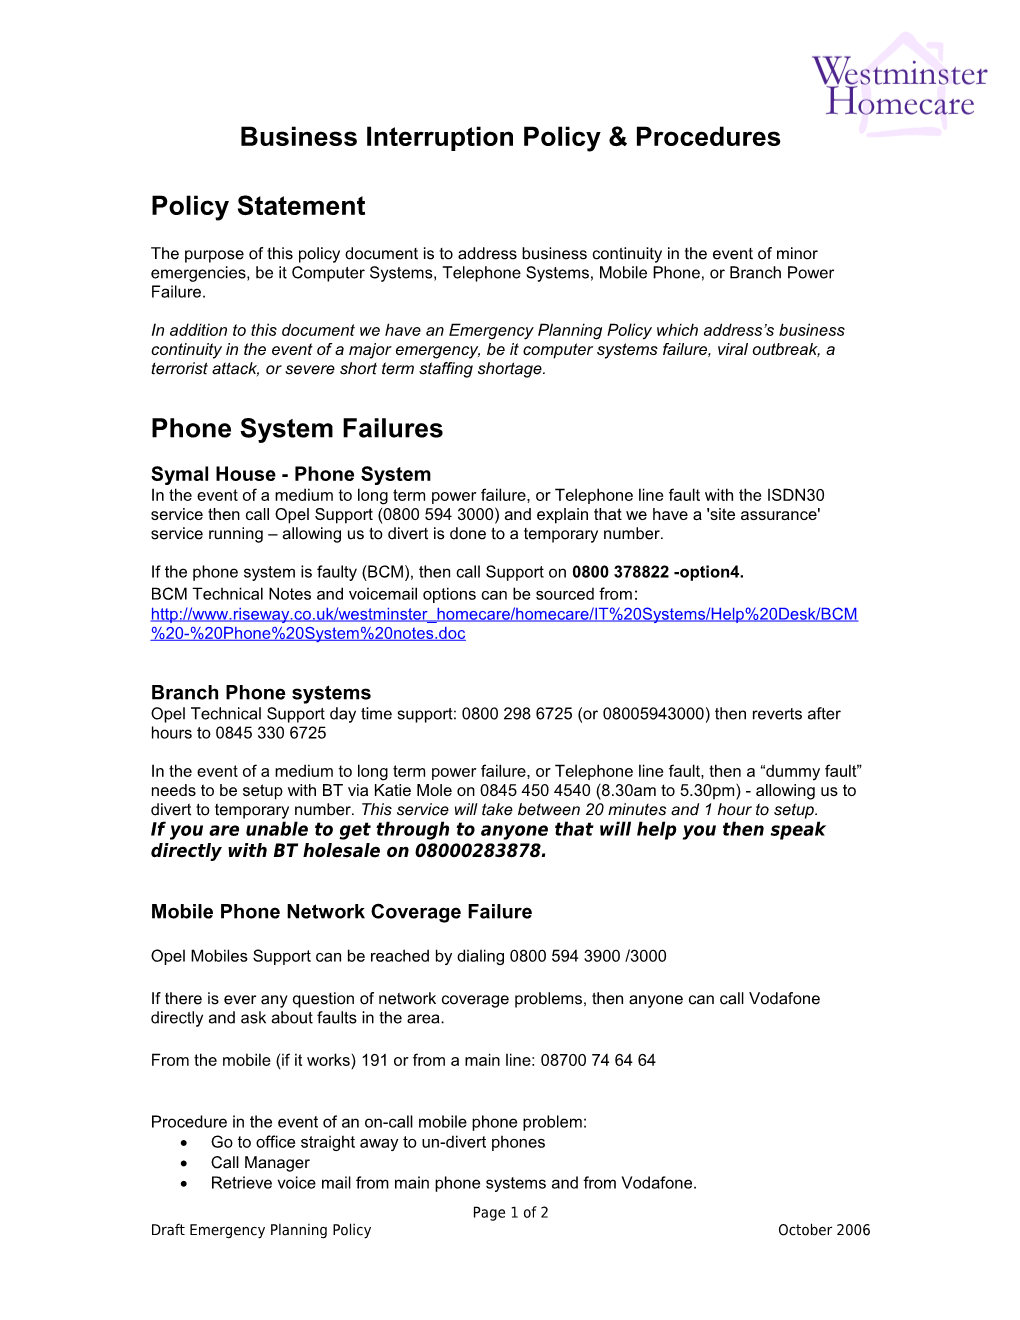 Emergency Planning Policy Document